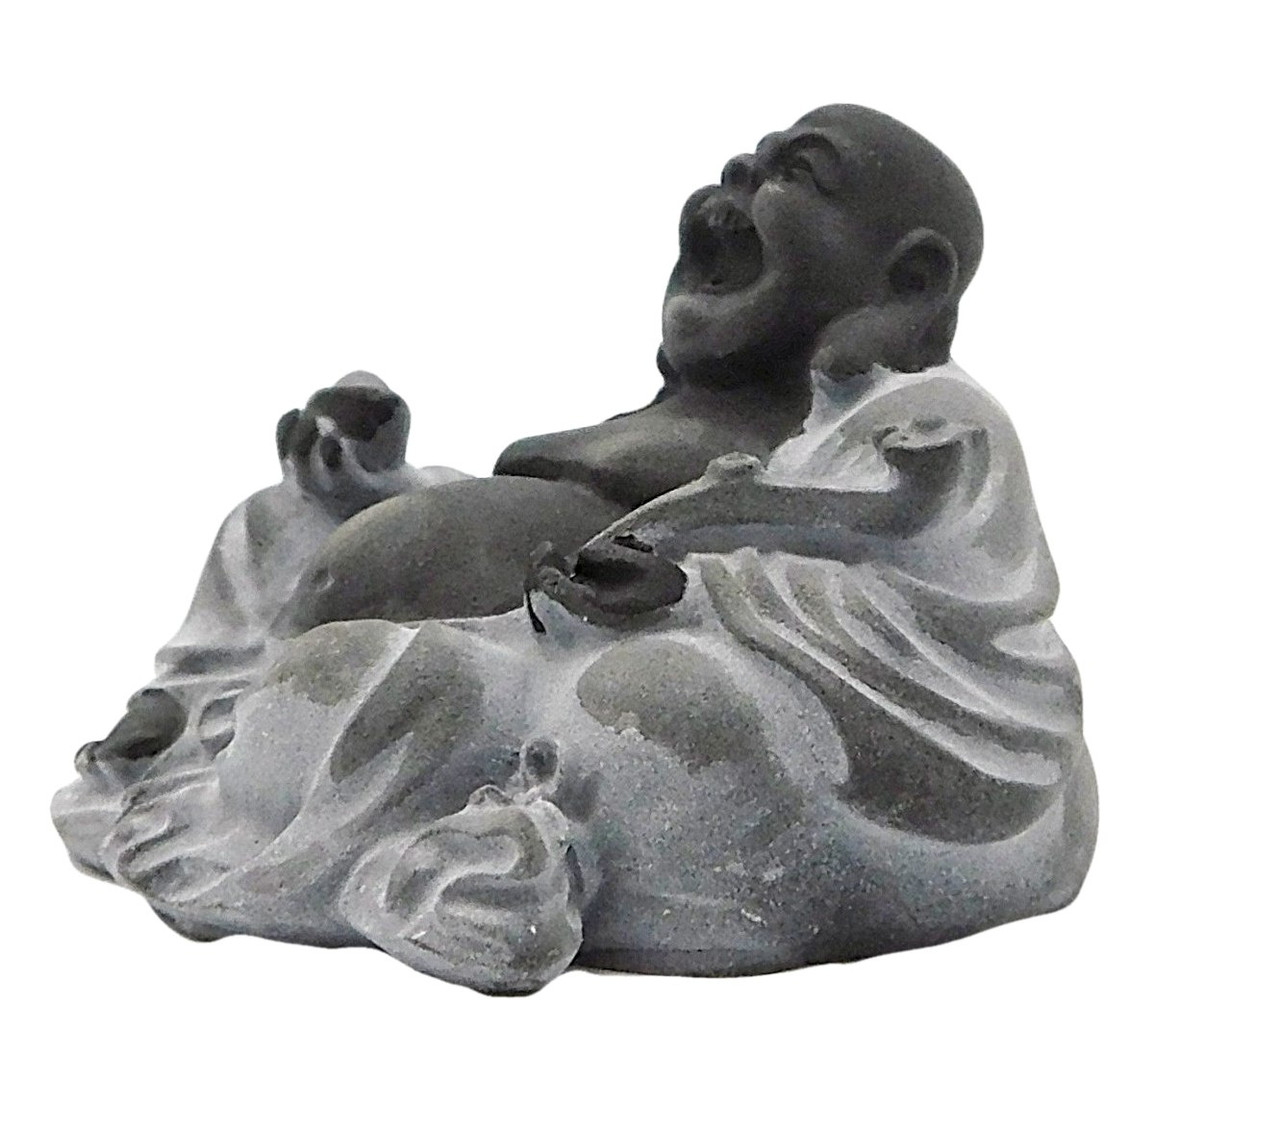 Big Bulk Laughing Buddha Statue for Home Decor, Statue for Living  Room,Bedroom,Office | House Warming Gift | SHOWPIECE for Living Room |  Buddha Statue for Home Decor (23 cm x 13 cm